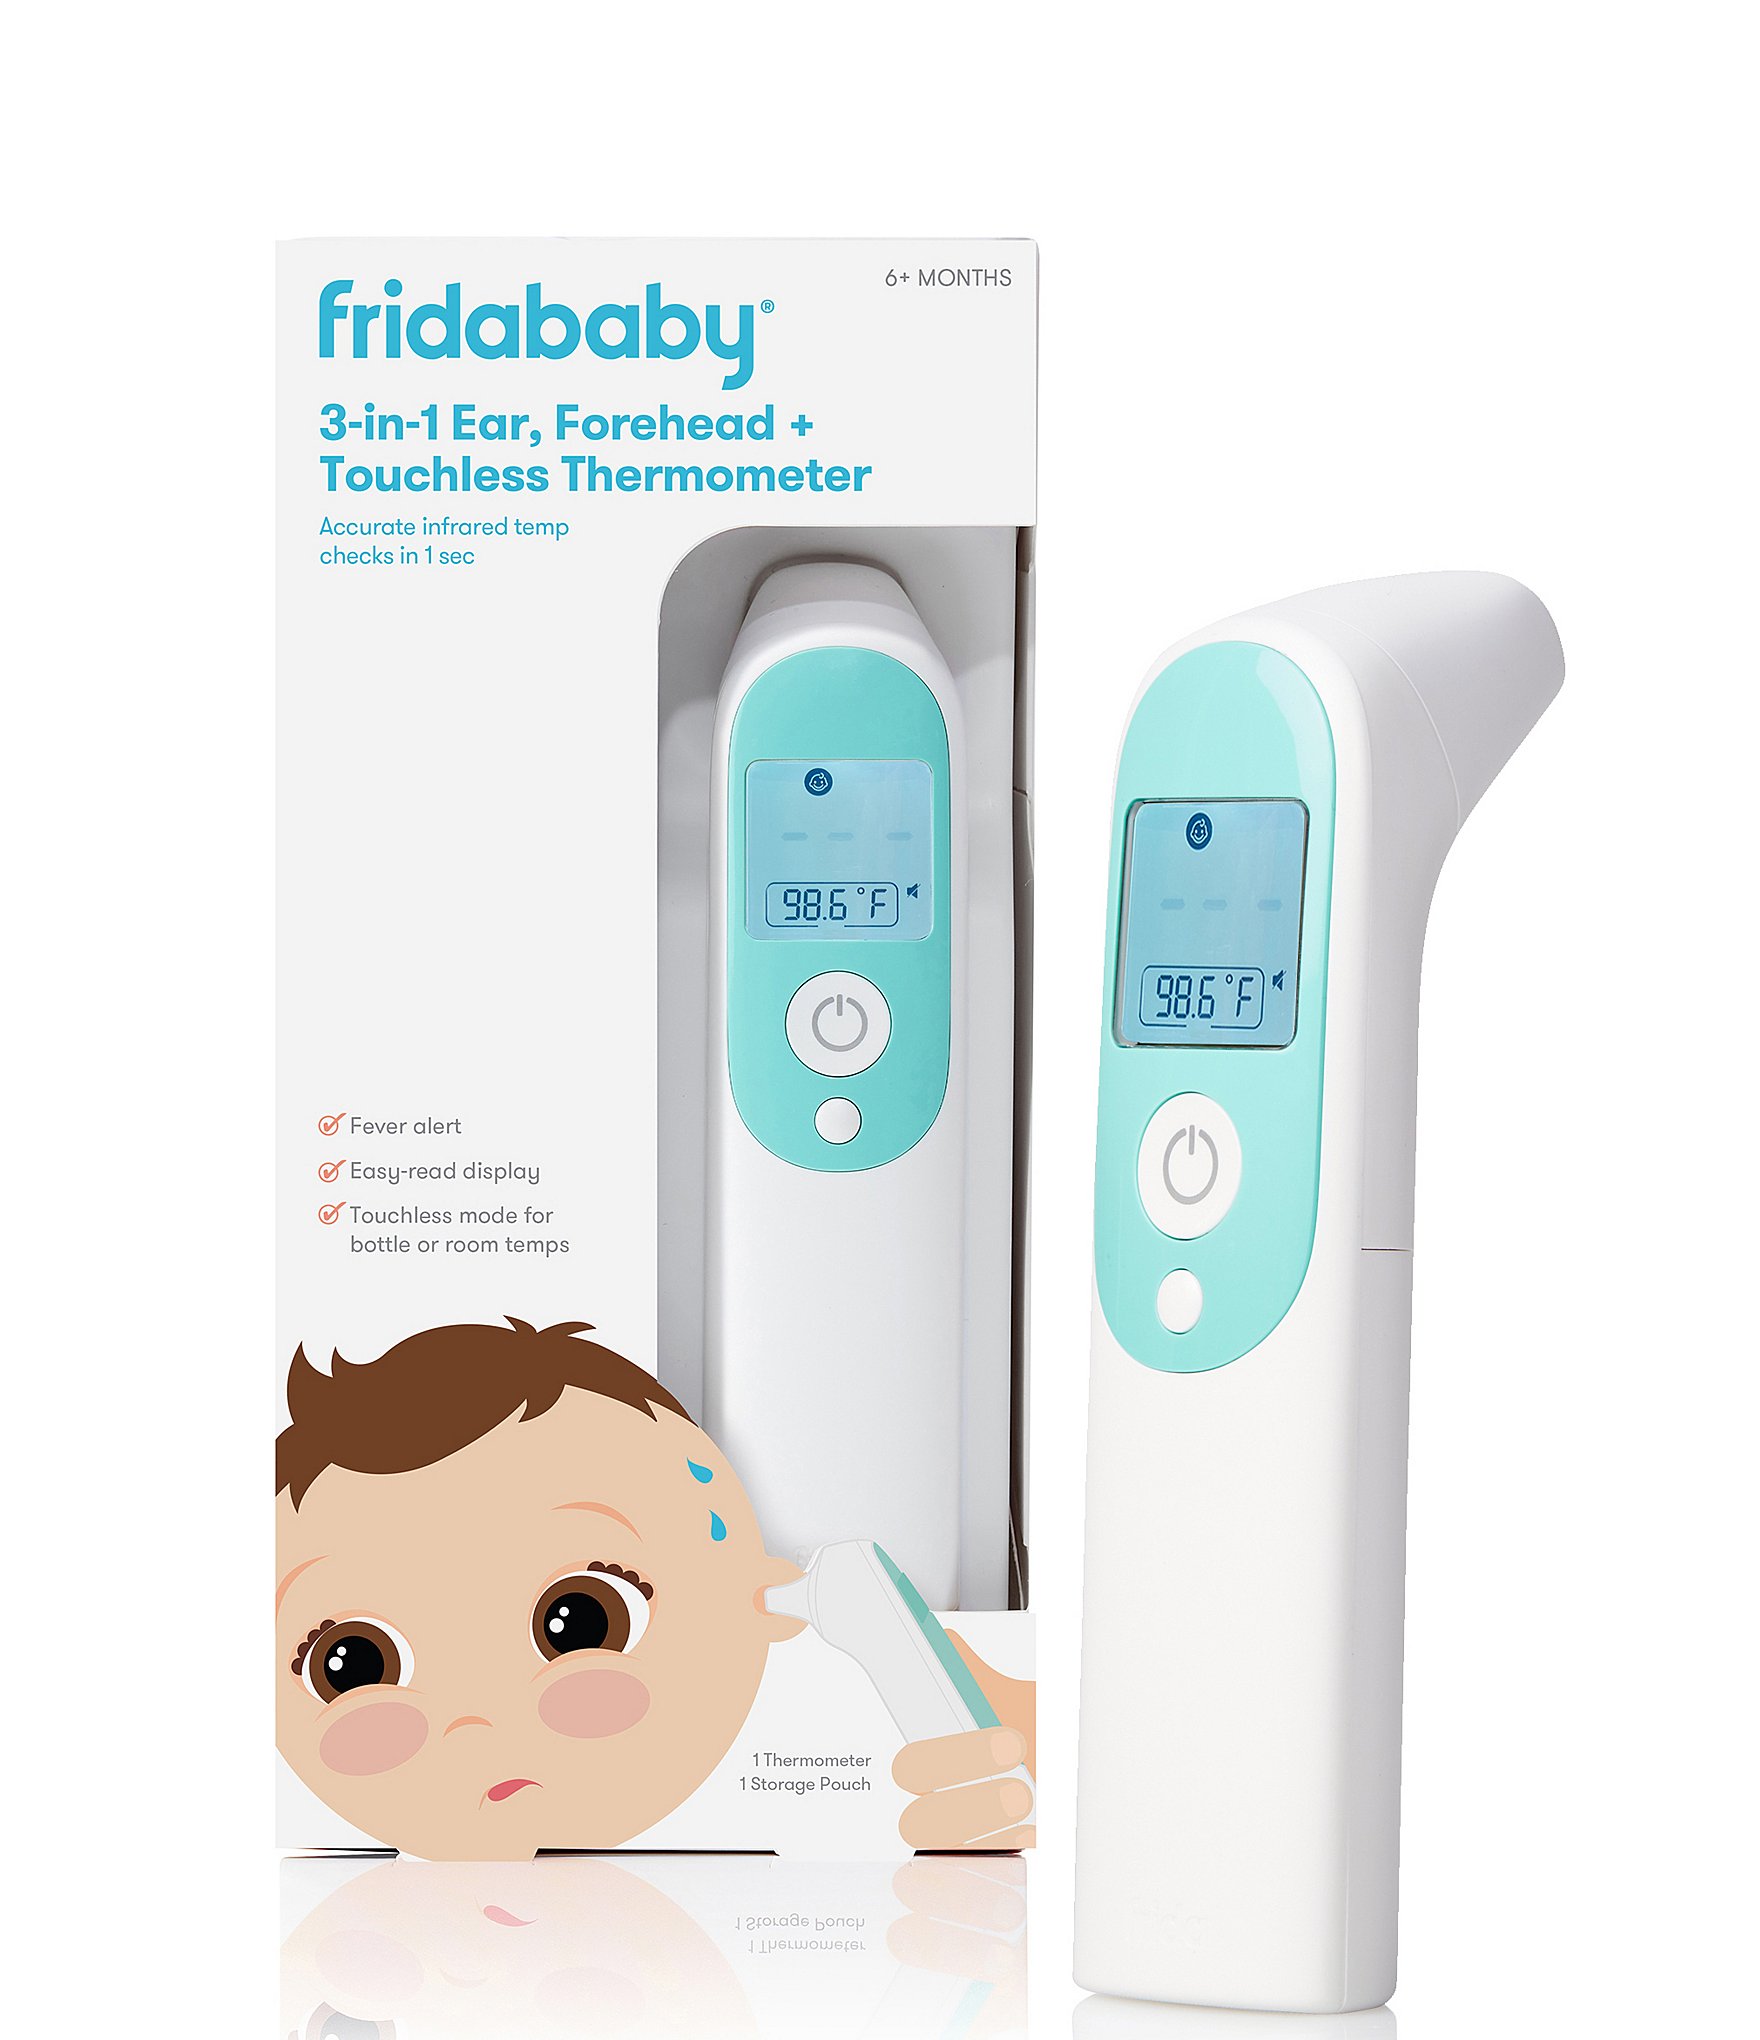 MOTOROLA 3-in-1 Non-Contact Smart Thermometer in the Baby